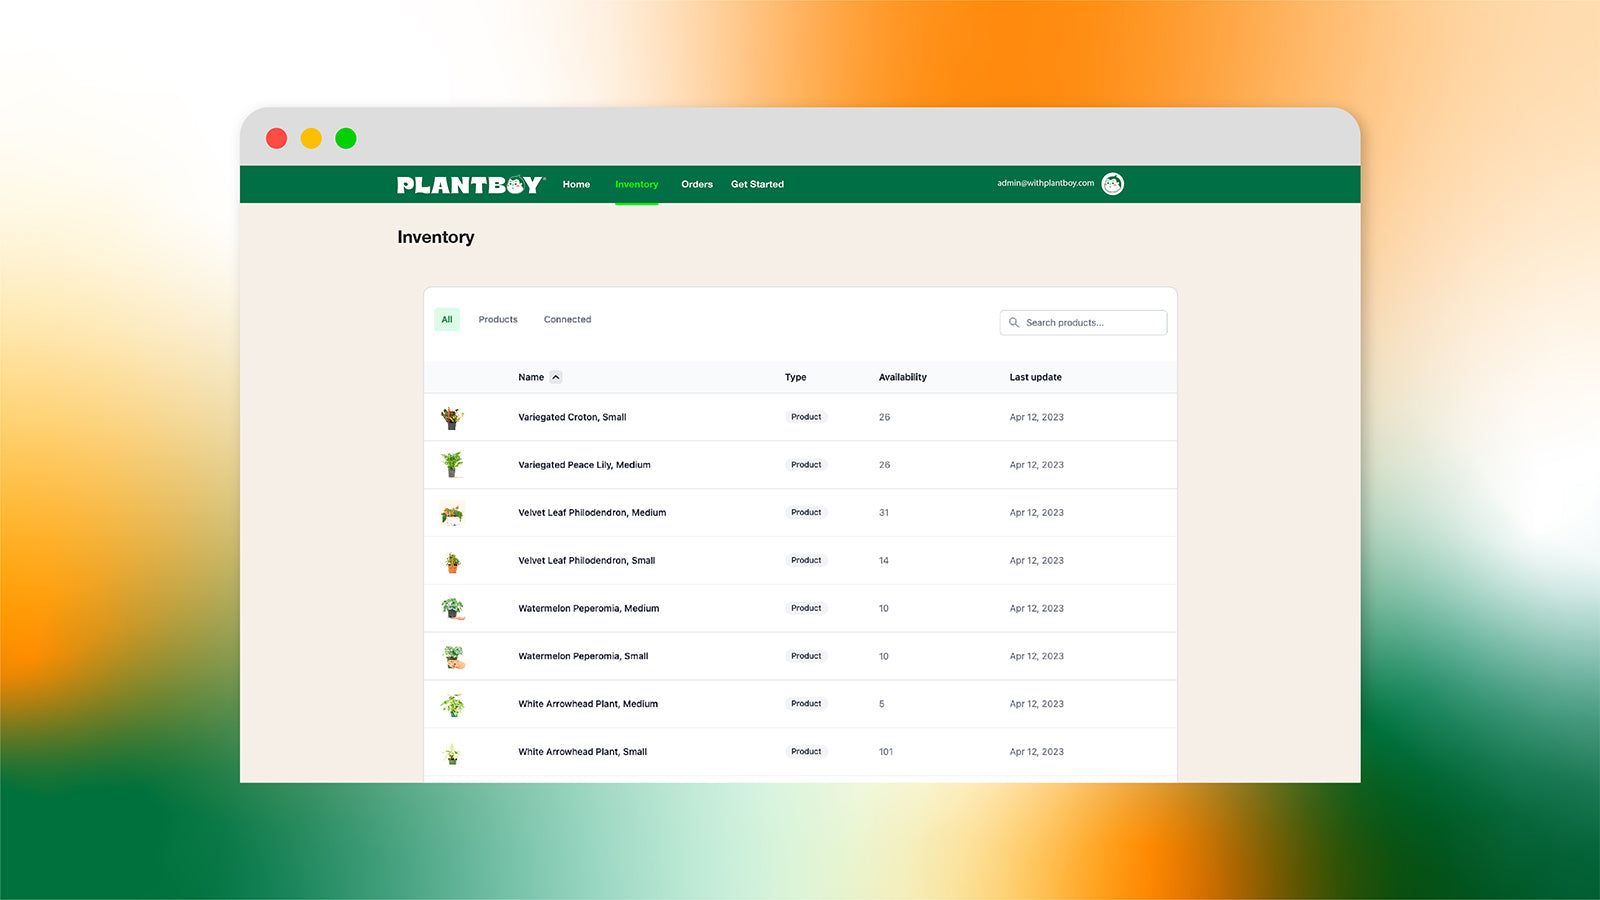 Screenshot of the inventory page in the Plantboy application